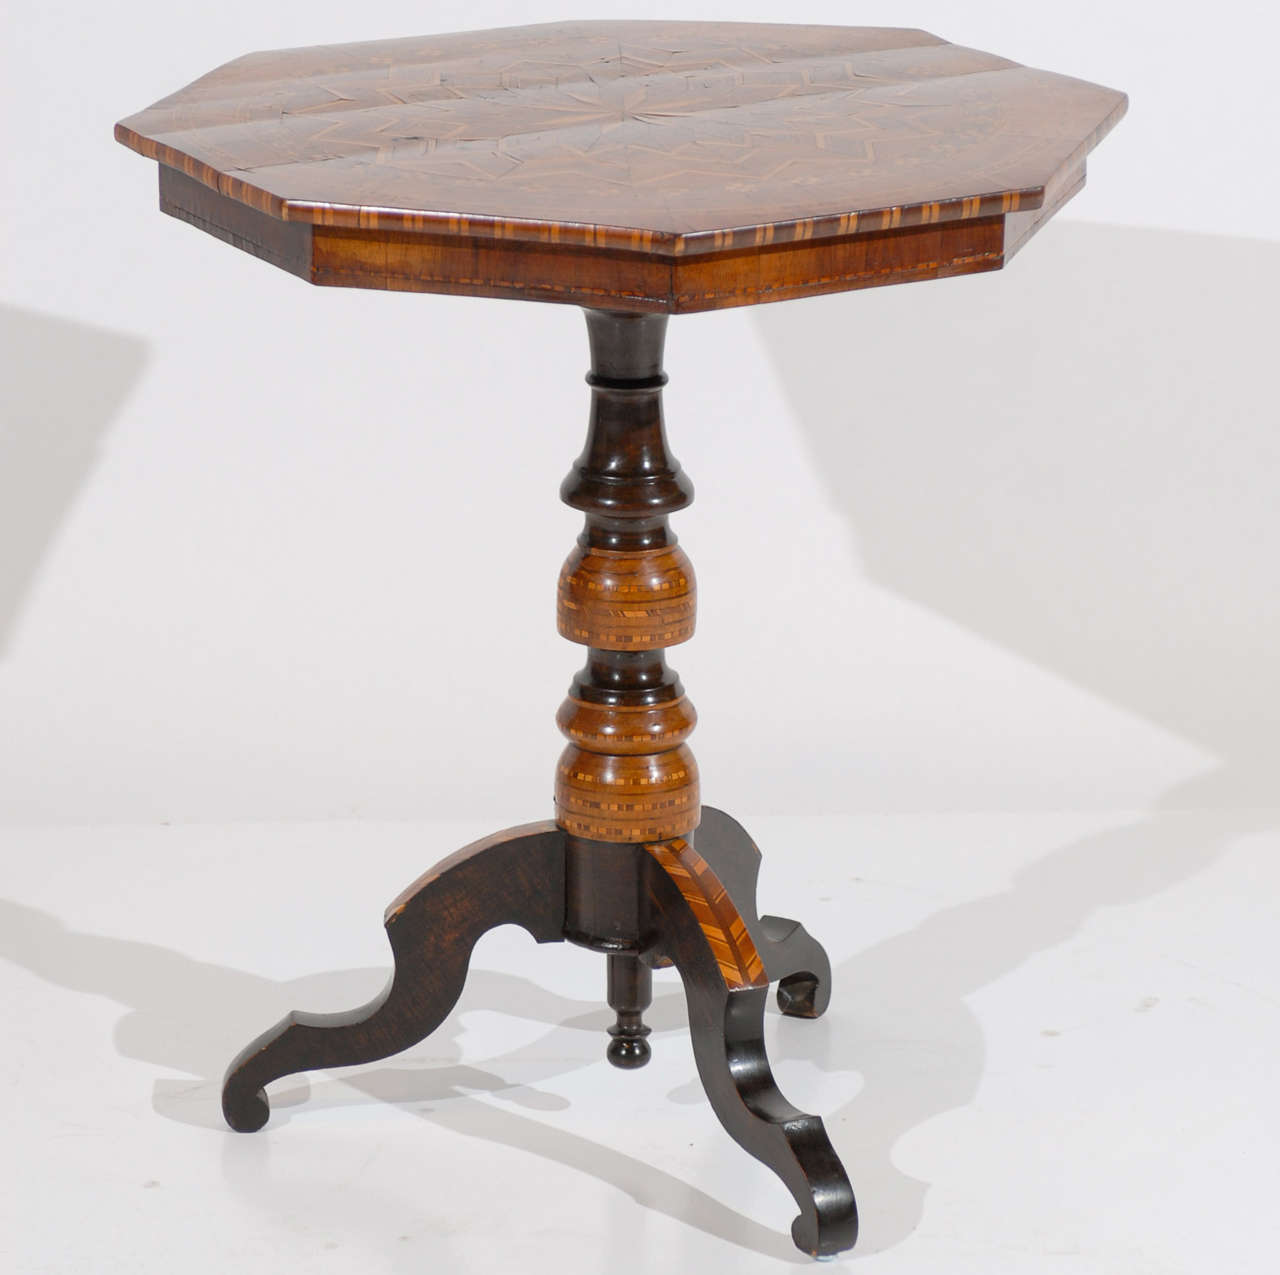 19th century walnut Sorrento table with octagonal shaped top, turned pedestal base, and shaped tripod legs. Walnut parquetry inlaid top with ebonized and parquetry inlay below. Some minor warping to the top. For many more fine antiques, please visit